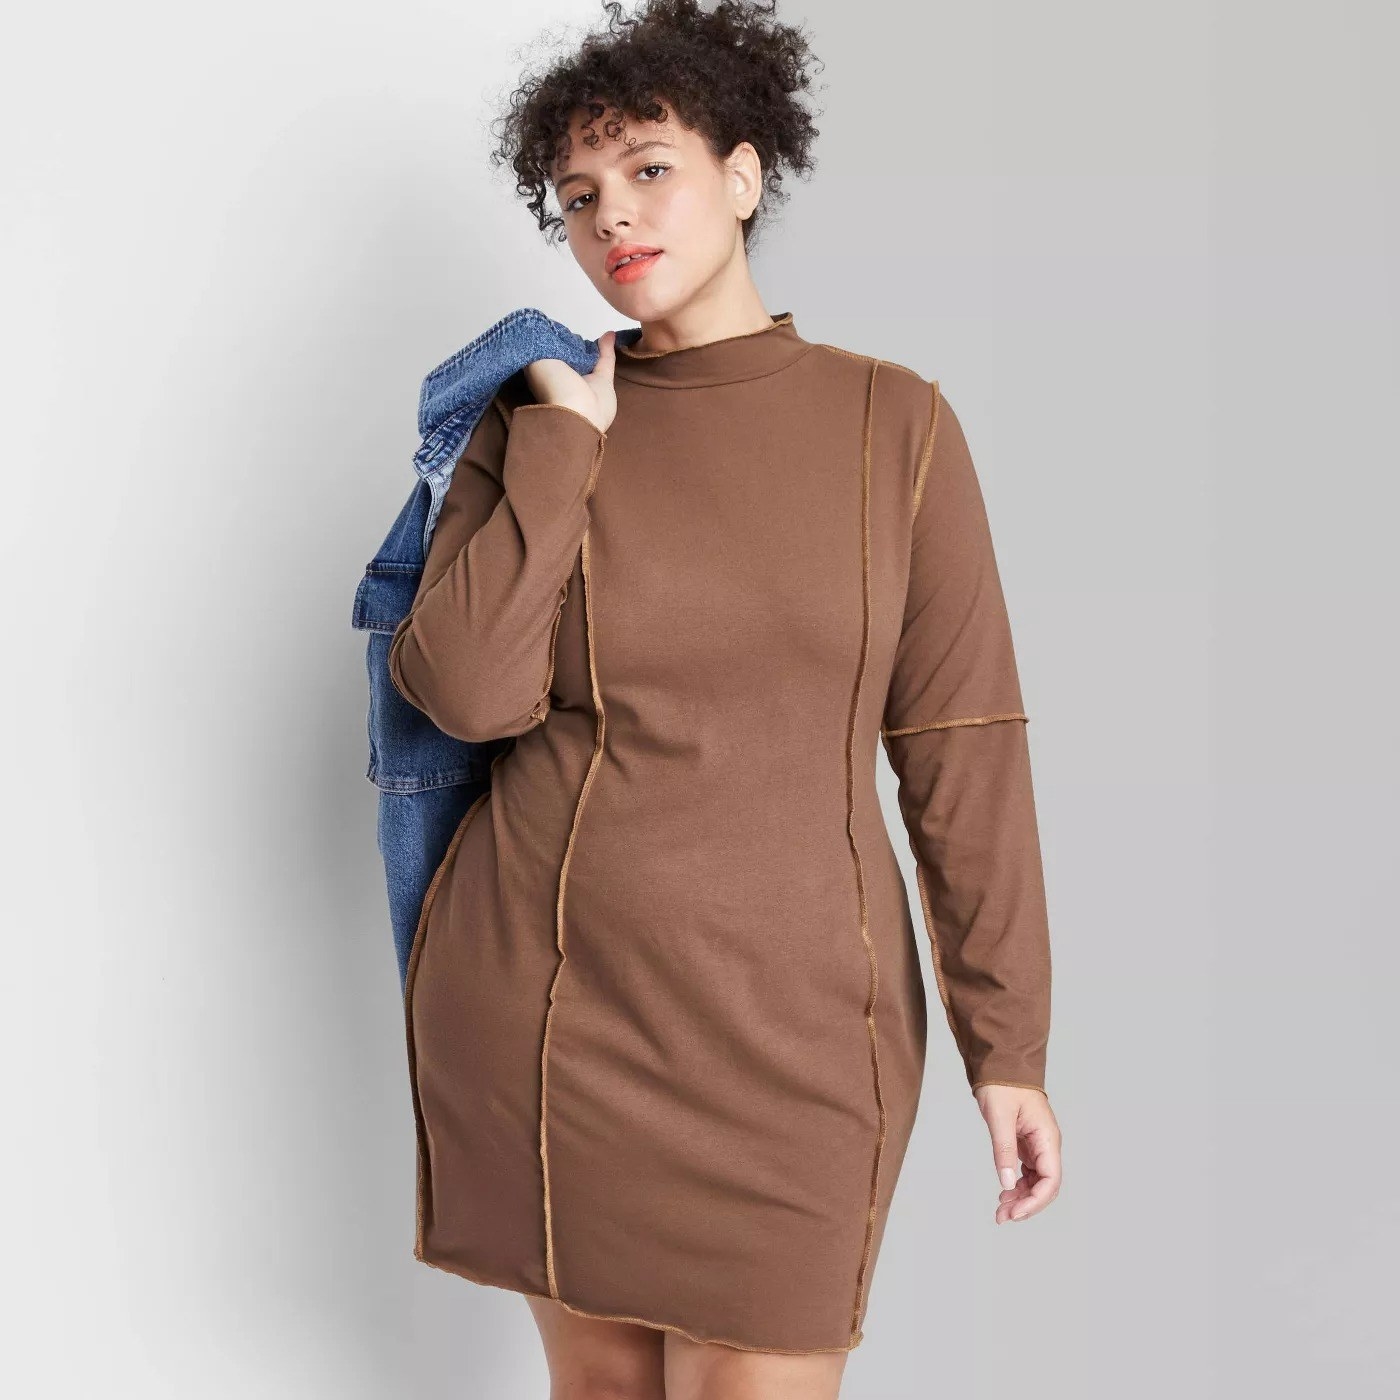 Model wearing long sleeve mocha colored dress, stops above the knee